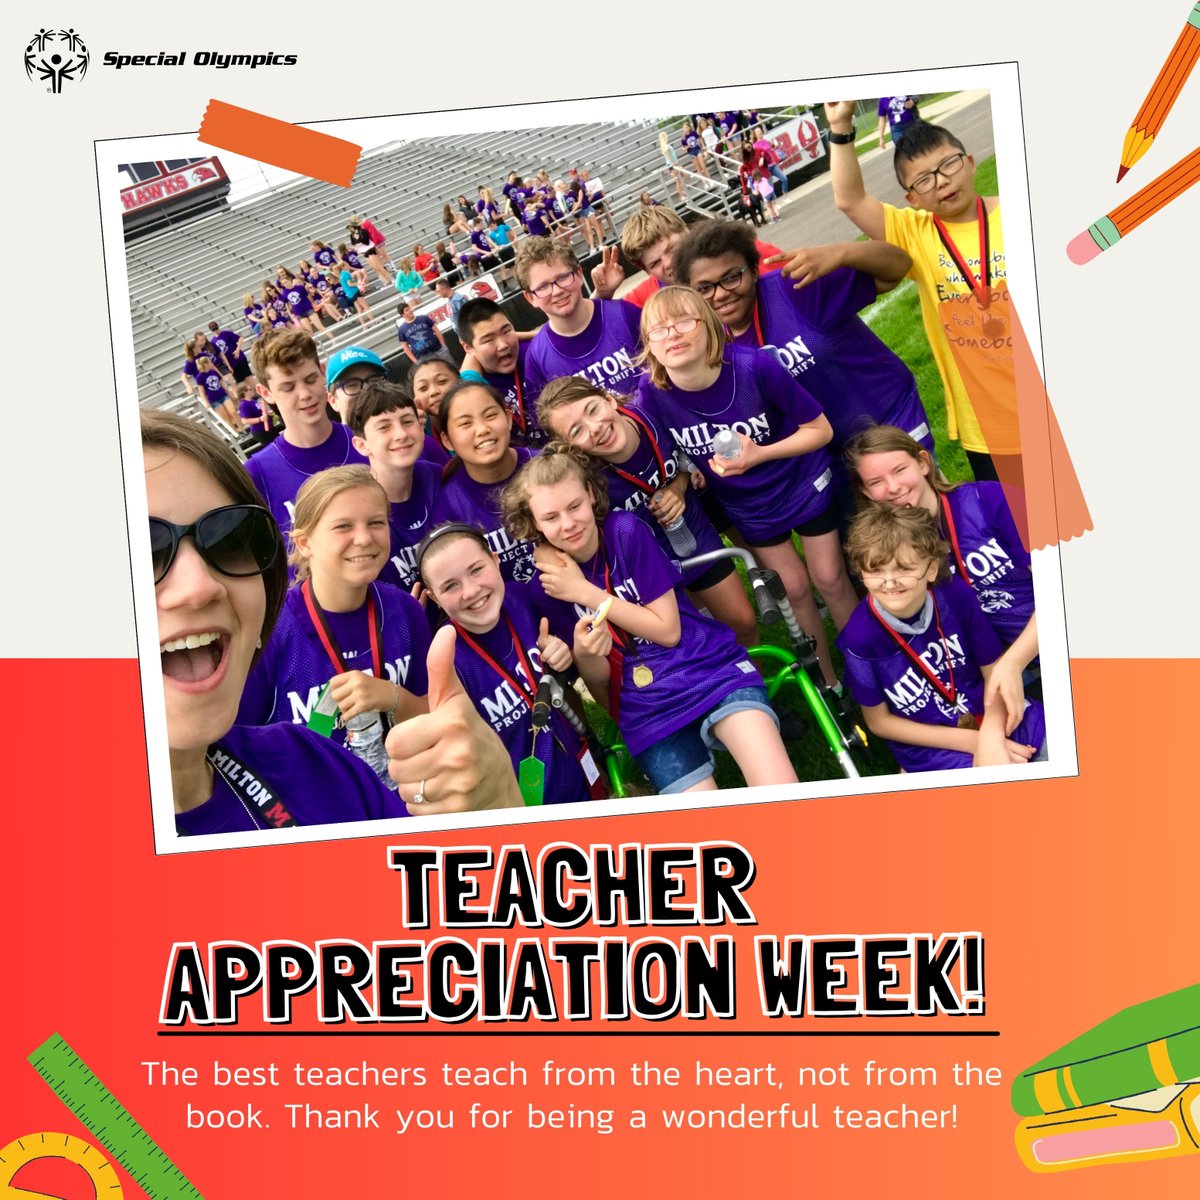 A big thumbs up to all the incredible teachers who inspire, educate, and empower students every day. Thank you for making a true difference! #TeacherAppreciationWeek #TagATeacher #SpecialOlympics